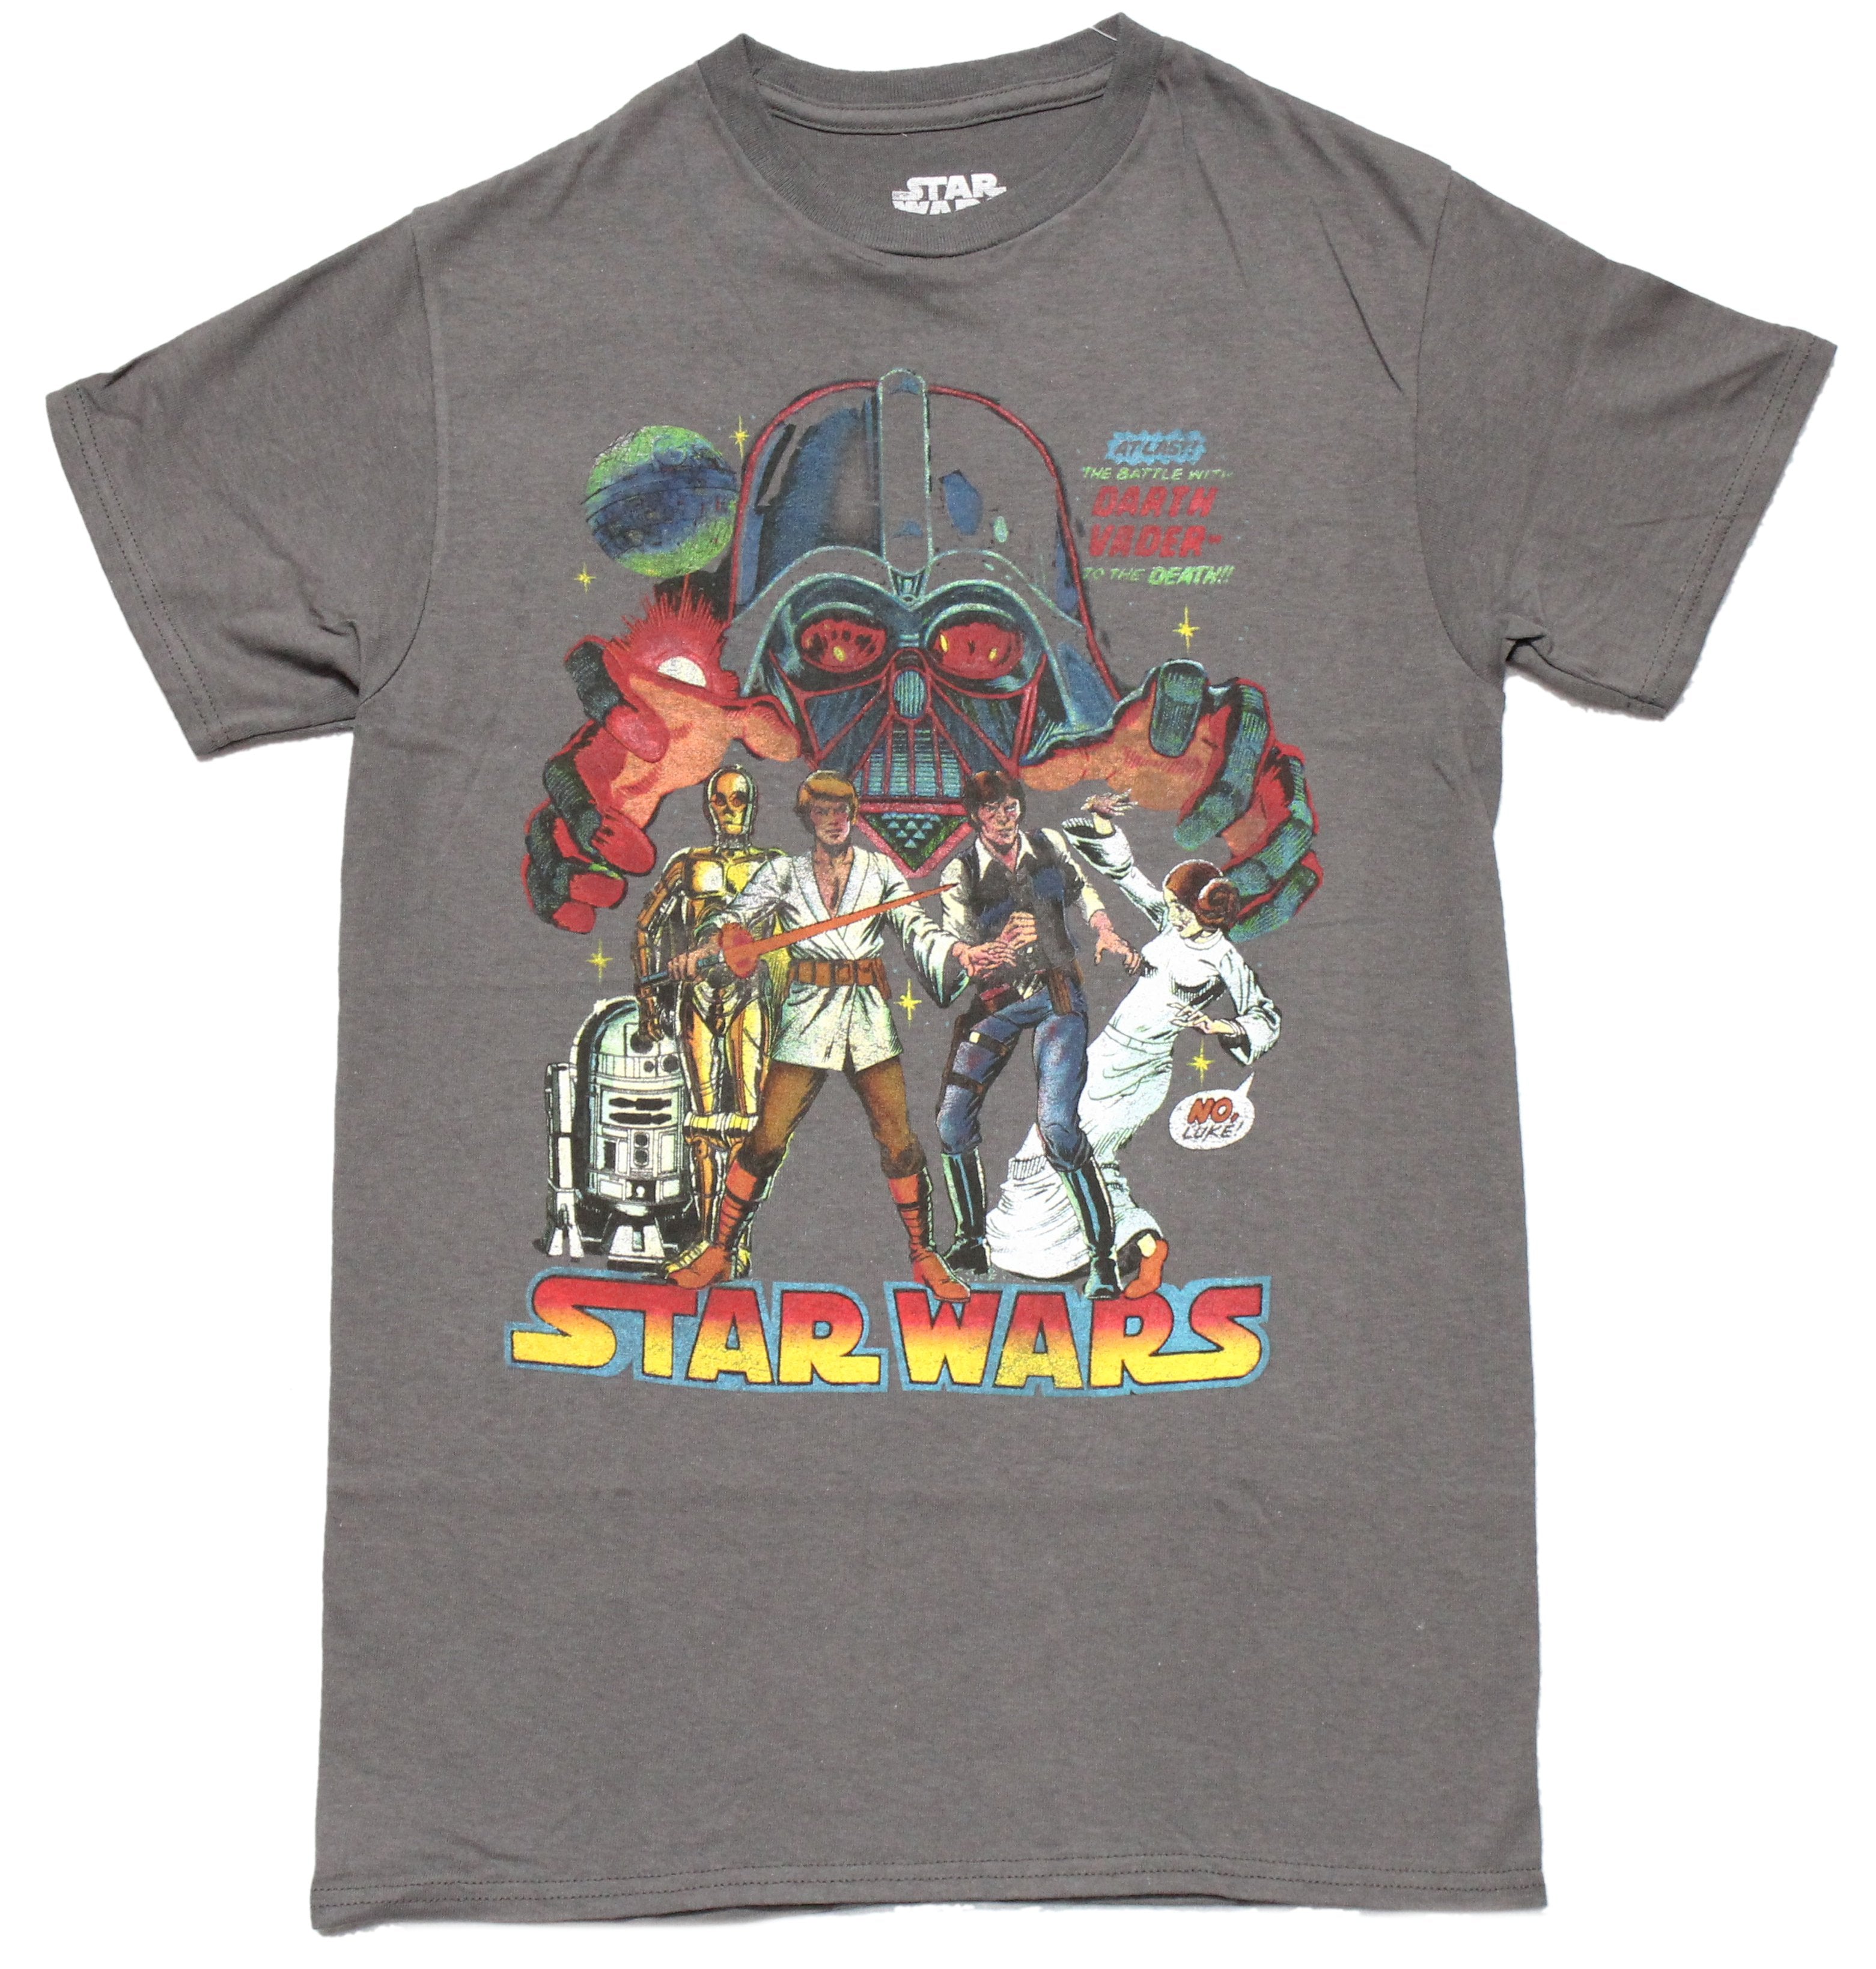 Star Wars Comic Style Mens T-Shirt - Darth Vader Battle to the Death